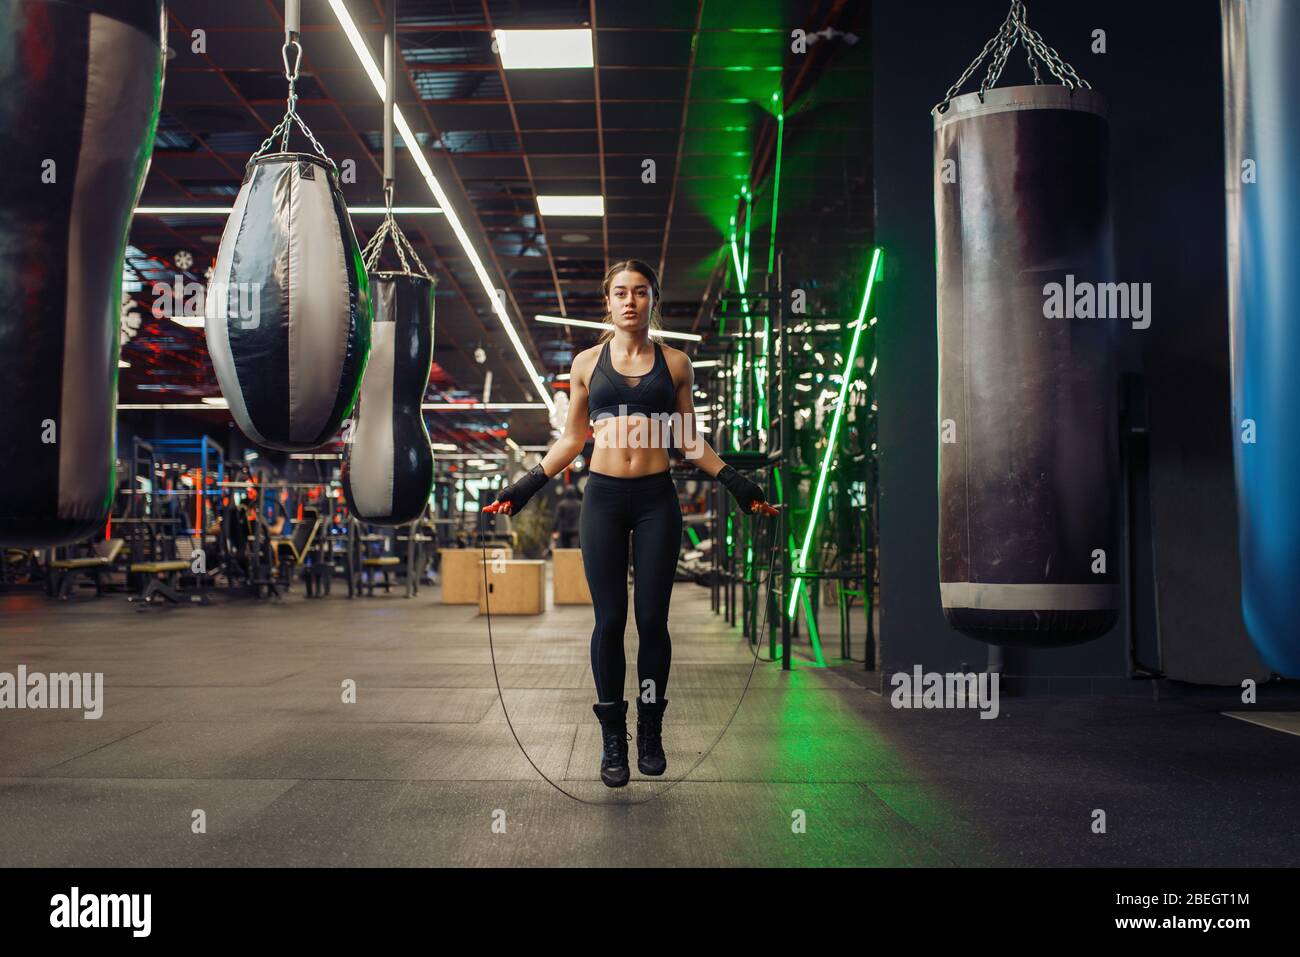 Woman jumps with a skipping rope, boxing training Stock Photo